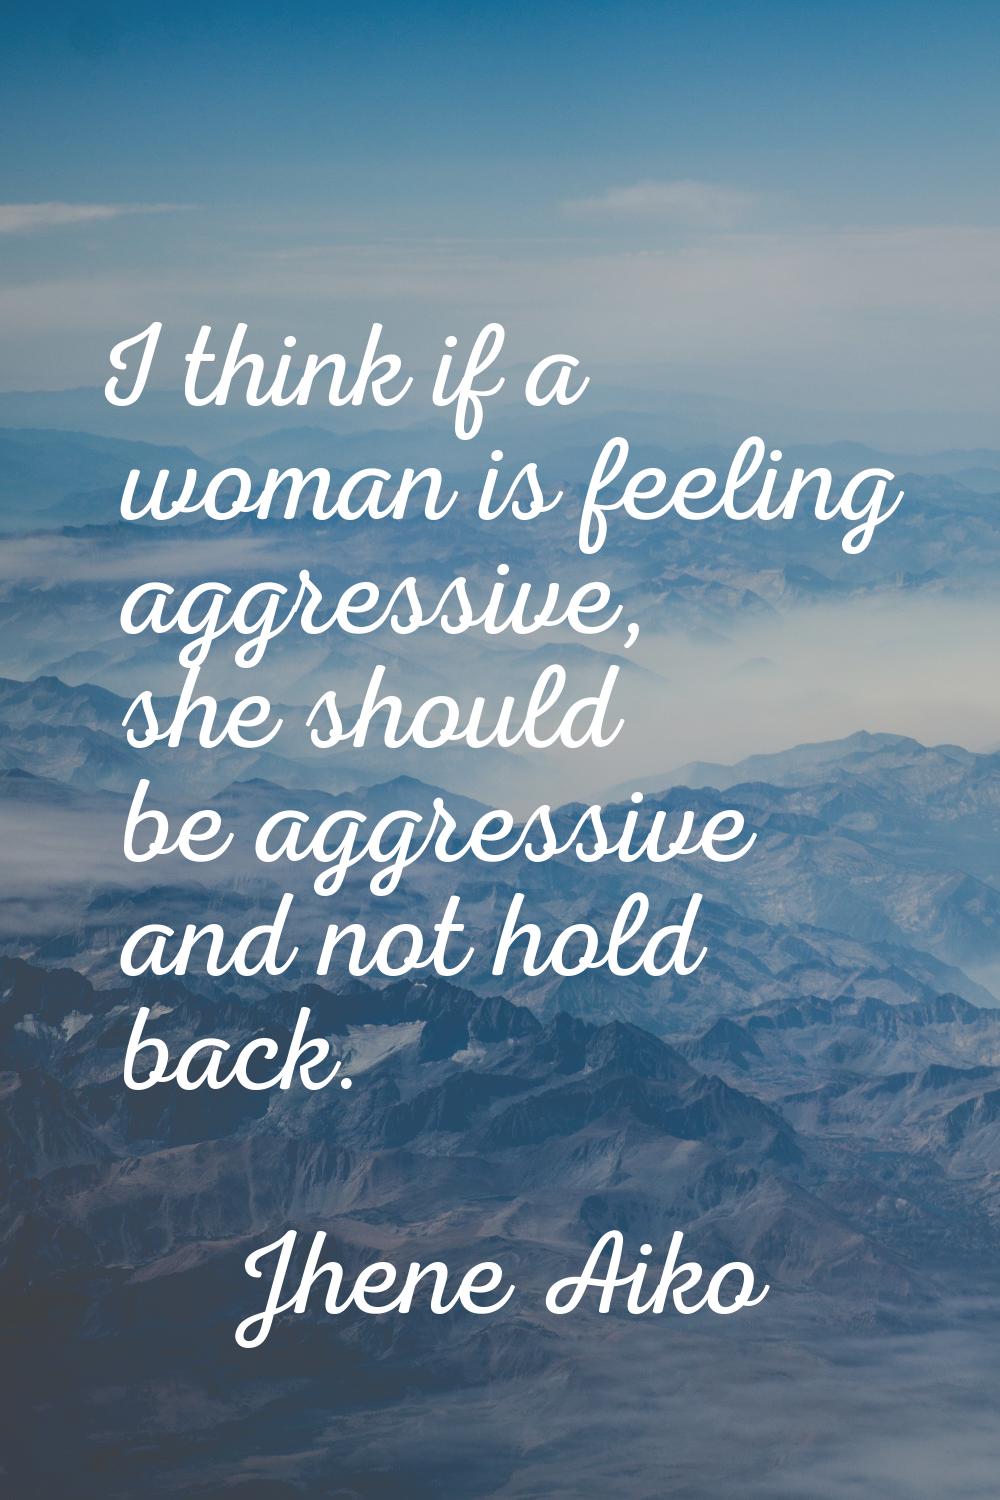 I think if a woman is feeling aggressive, she should be aggressive and not hold back.